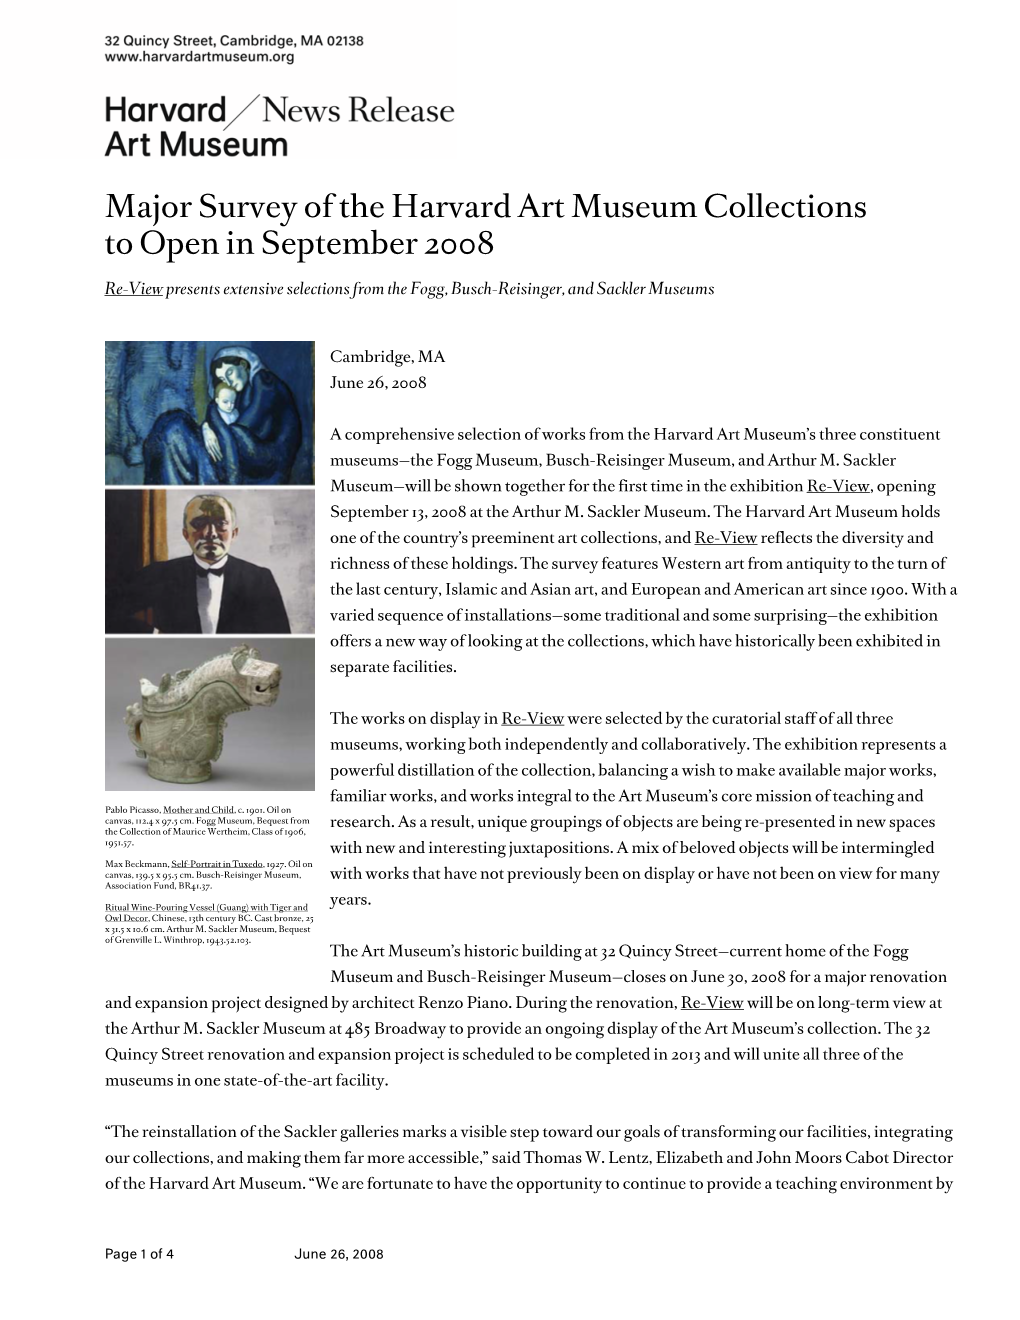 Major Survey of the Harvard Art Museum Collections to Open in September 2008